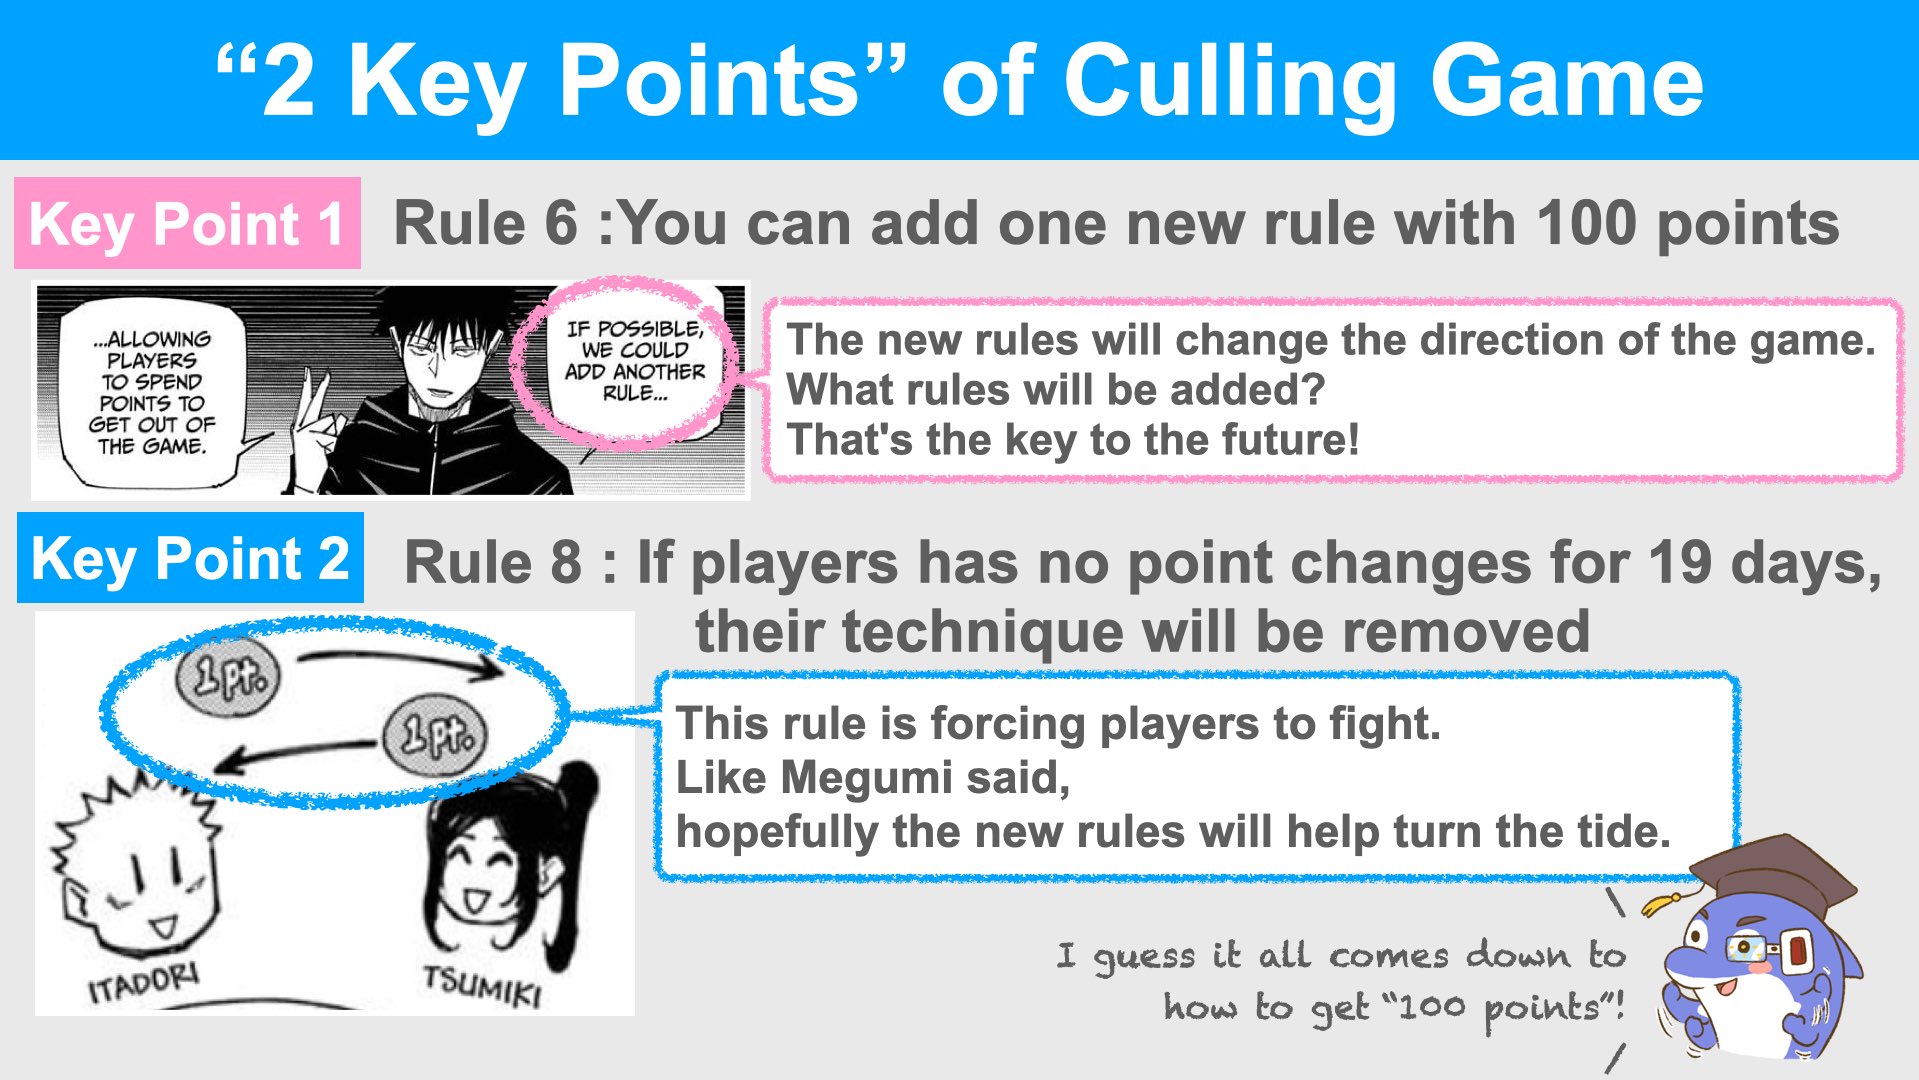 Kyle Scouter on X: 【Summary of Culling Game Rules】 Rules of